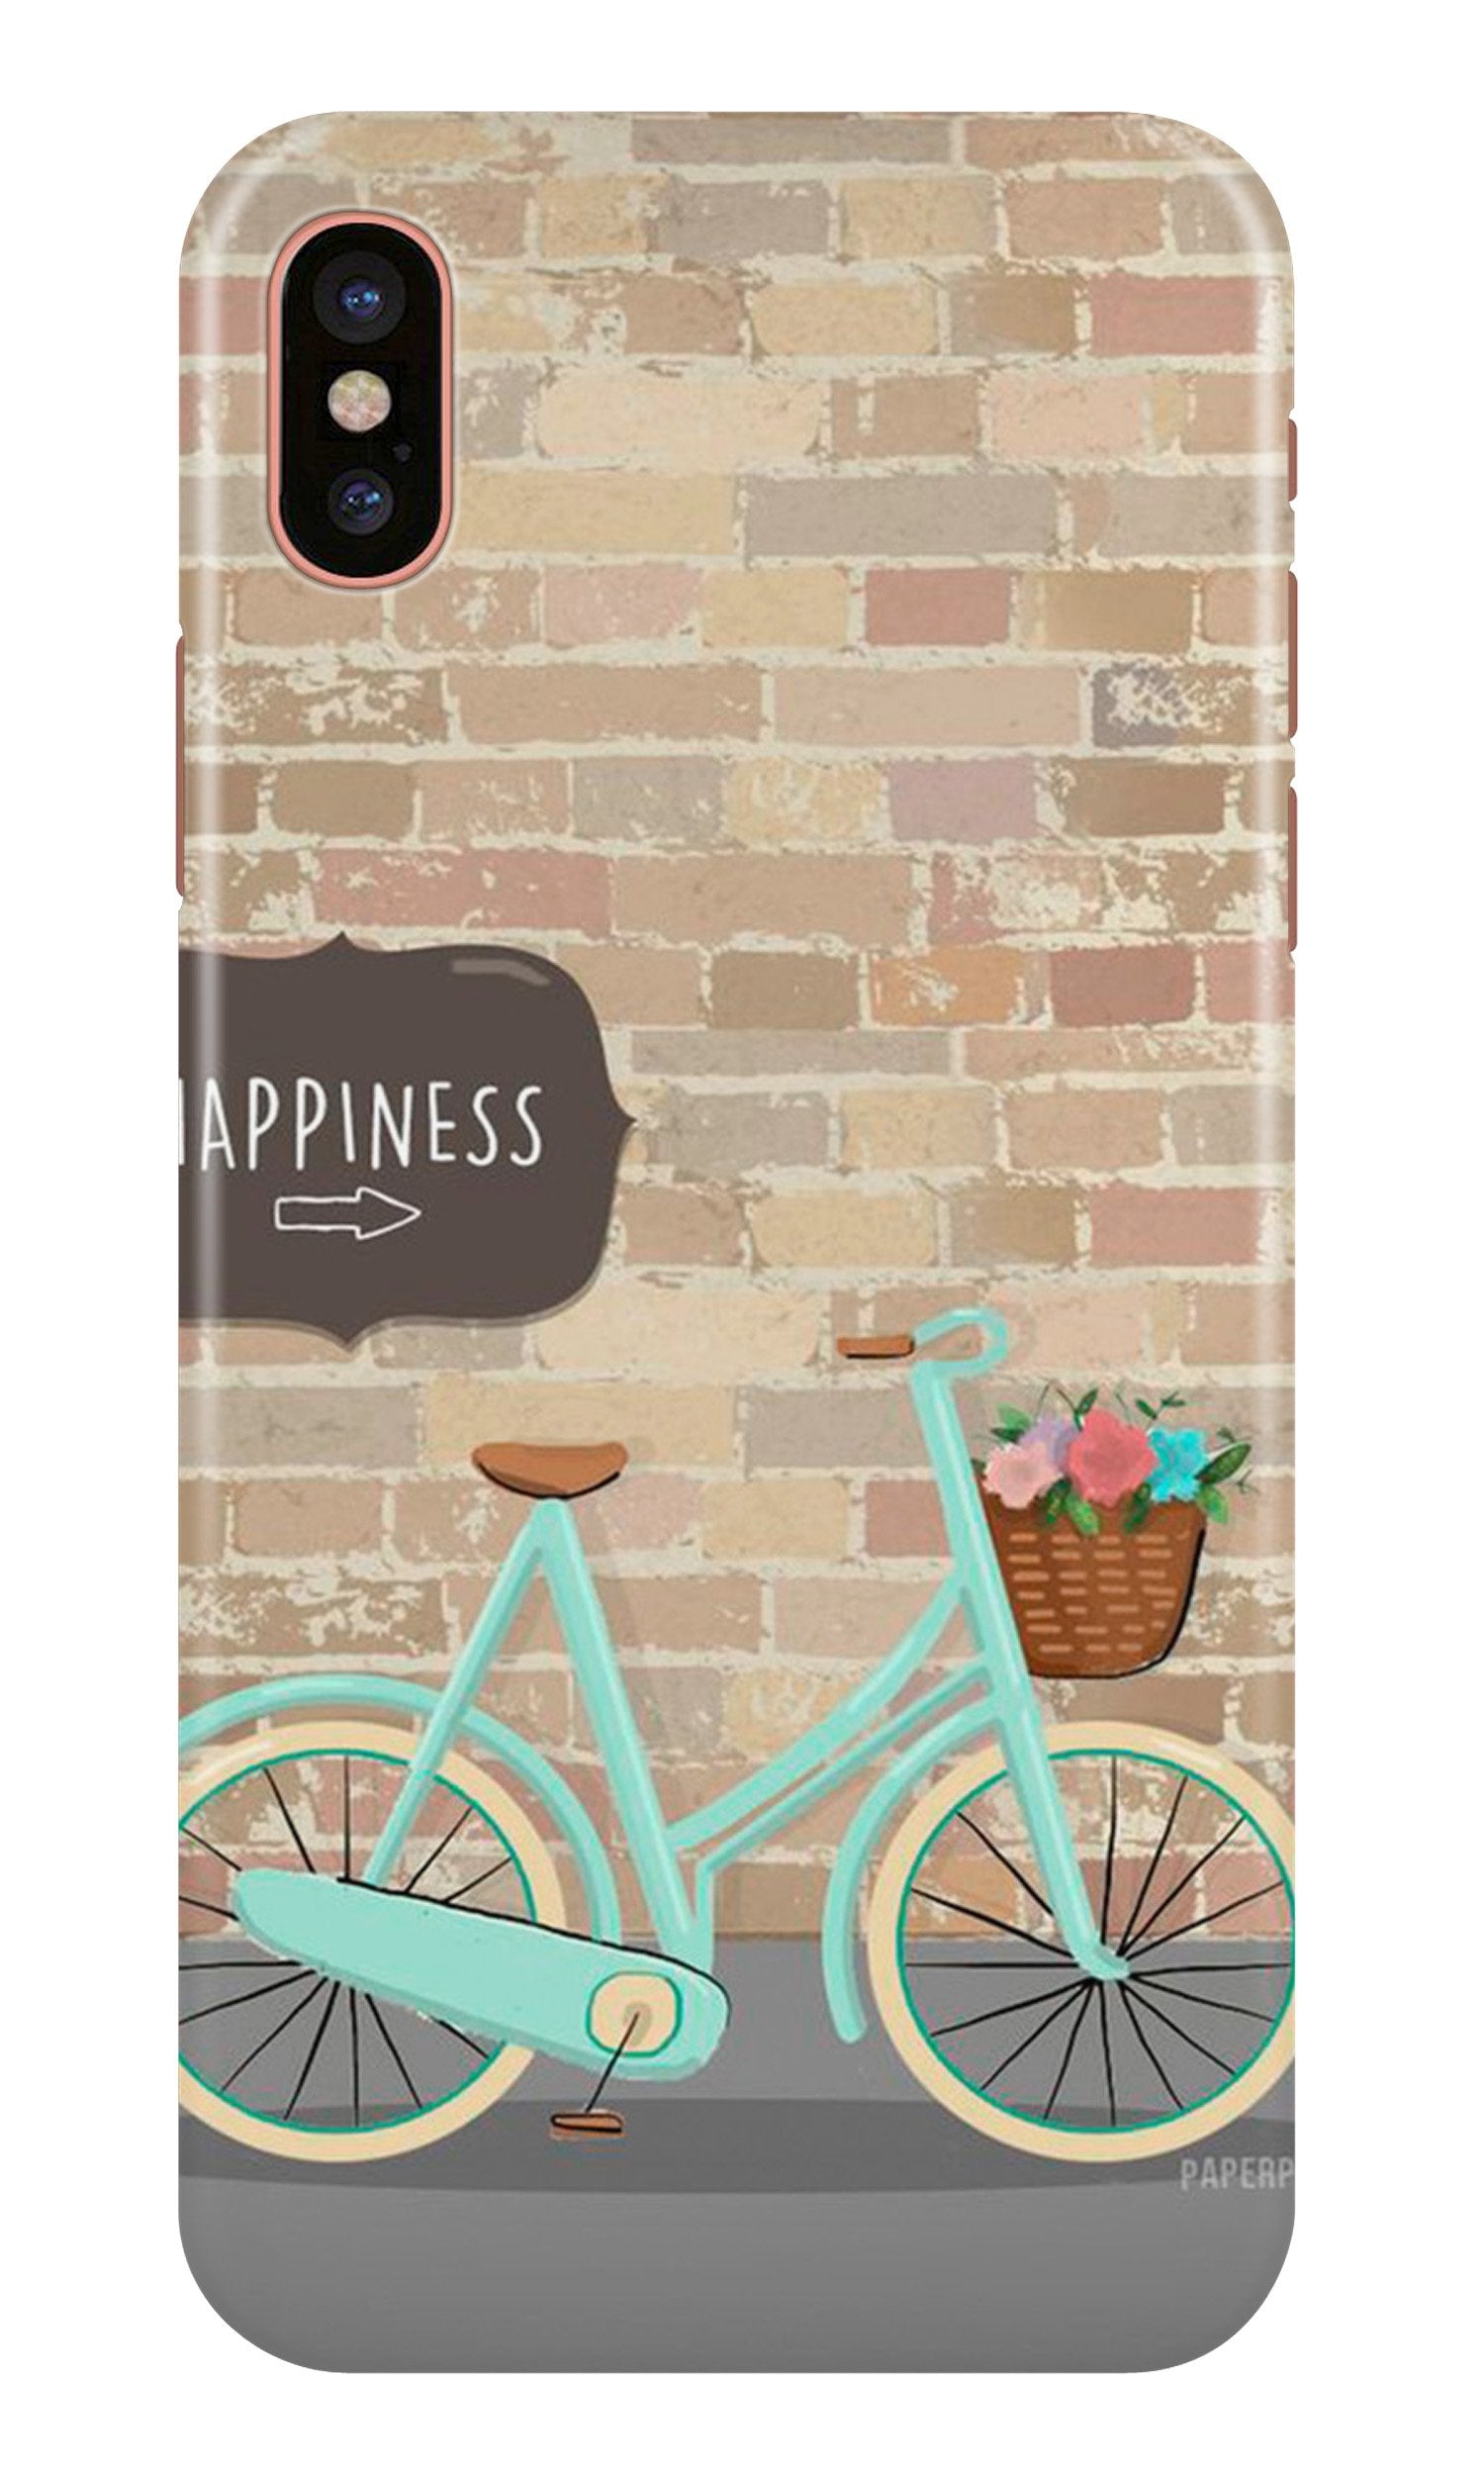 Happiness Case for iPhone X